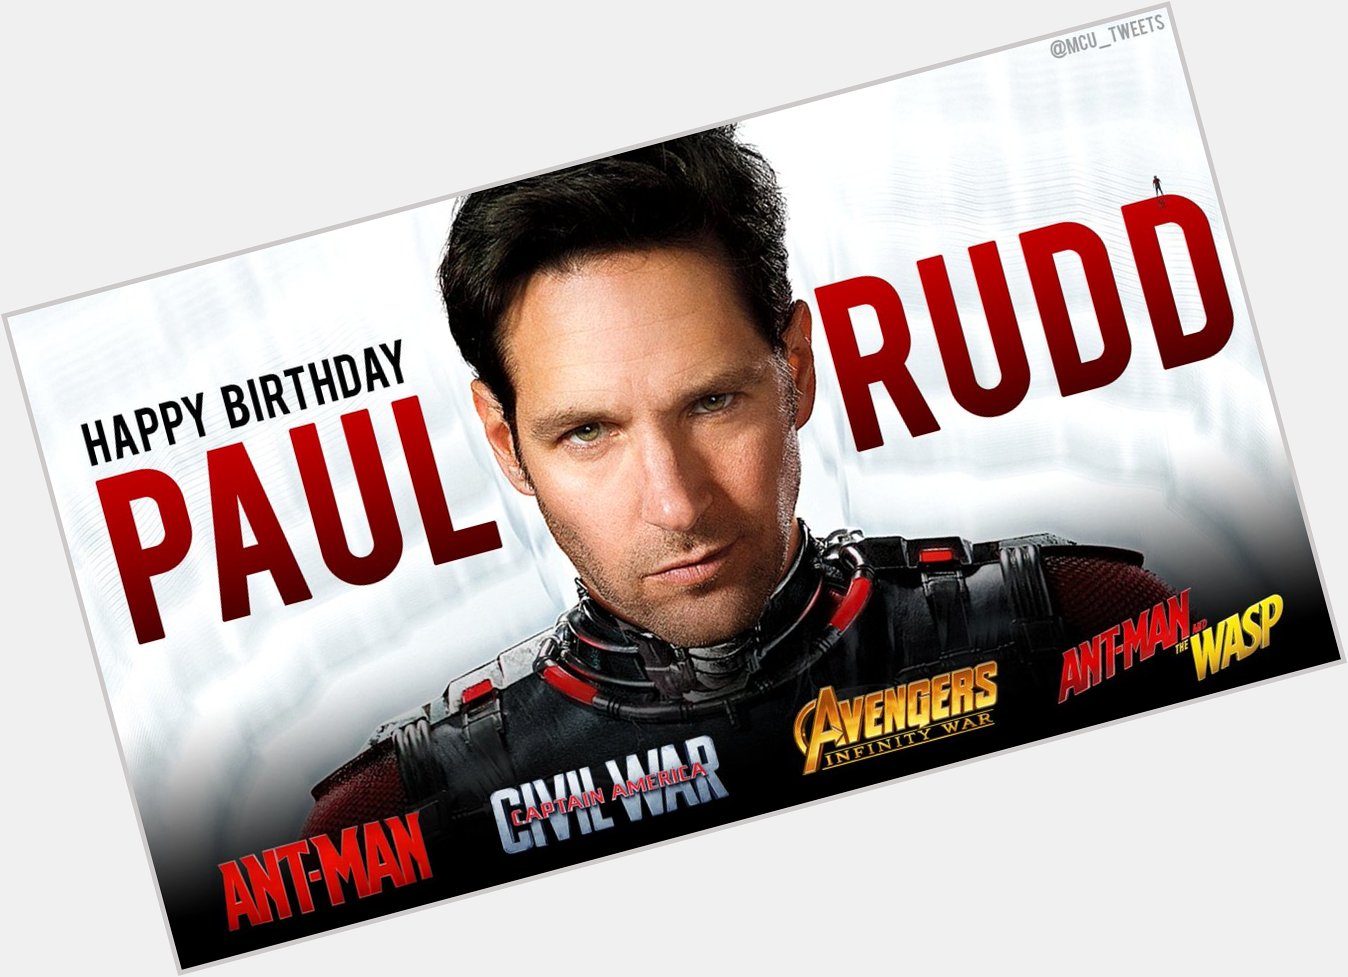 Join us in wishing Ant-Man himself, actor Paul Rudd, a very happy 49th birthday! 